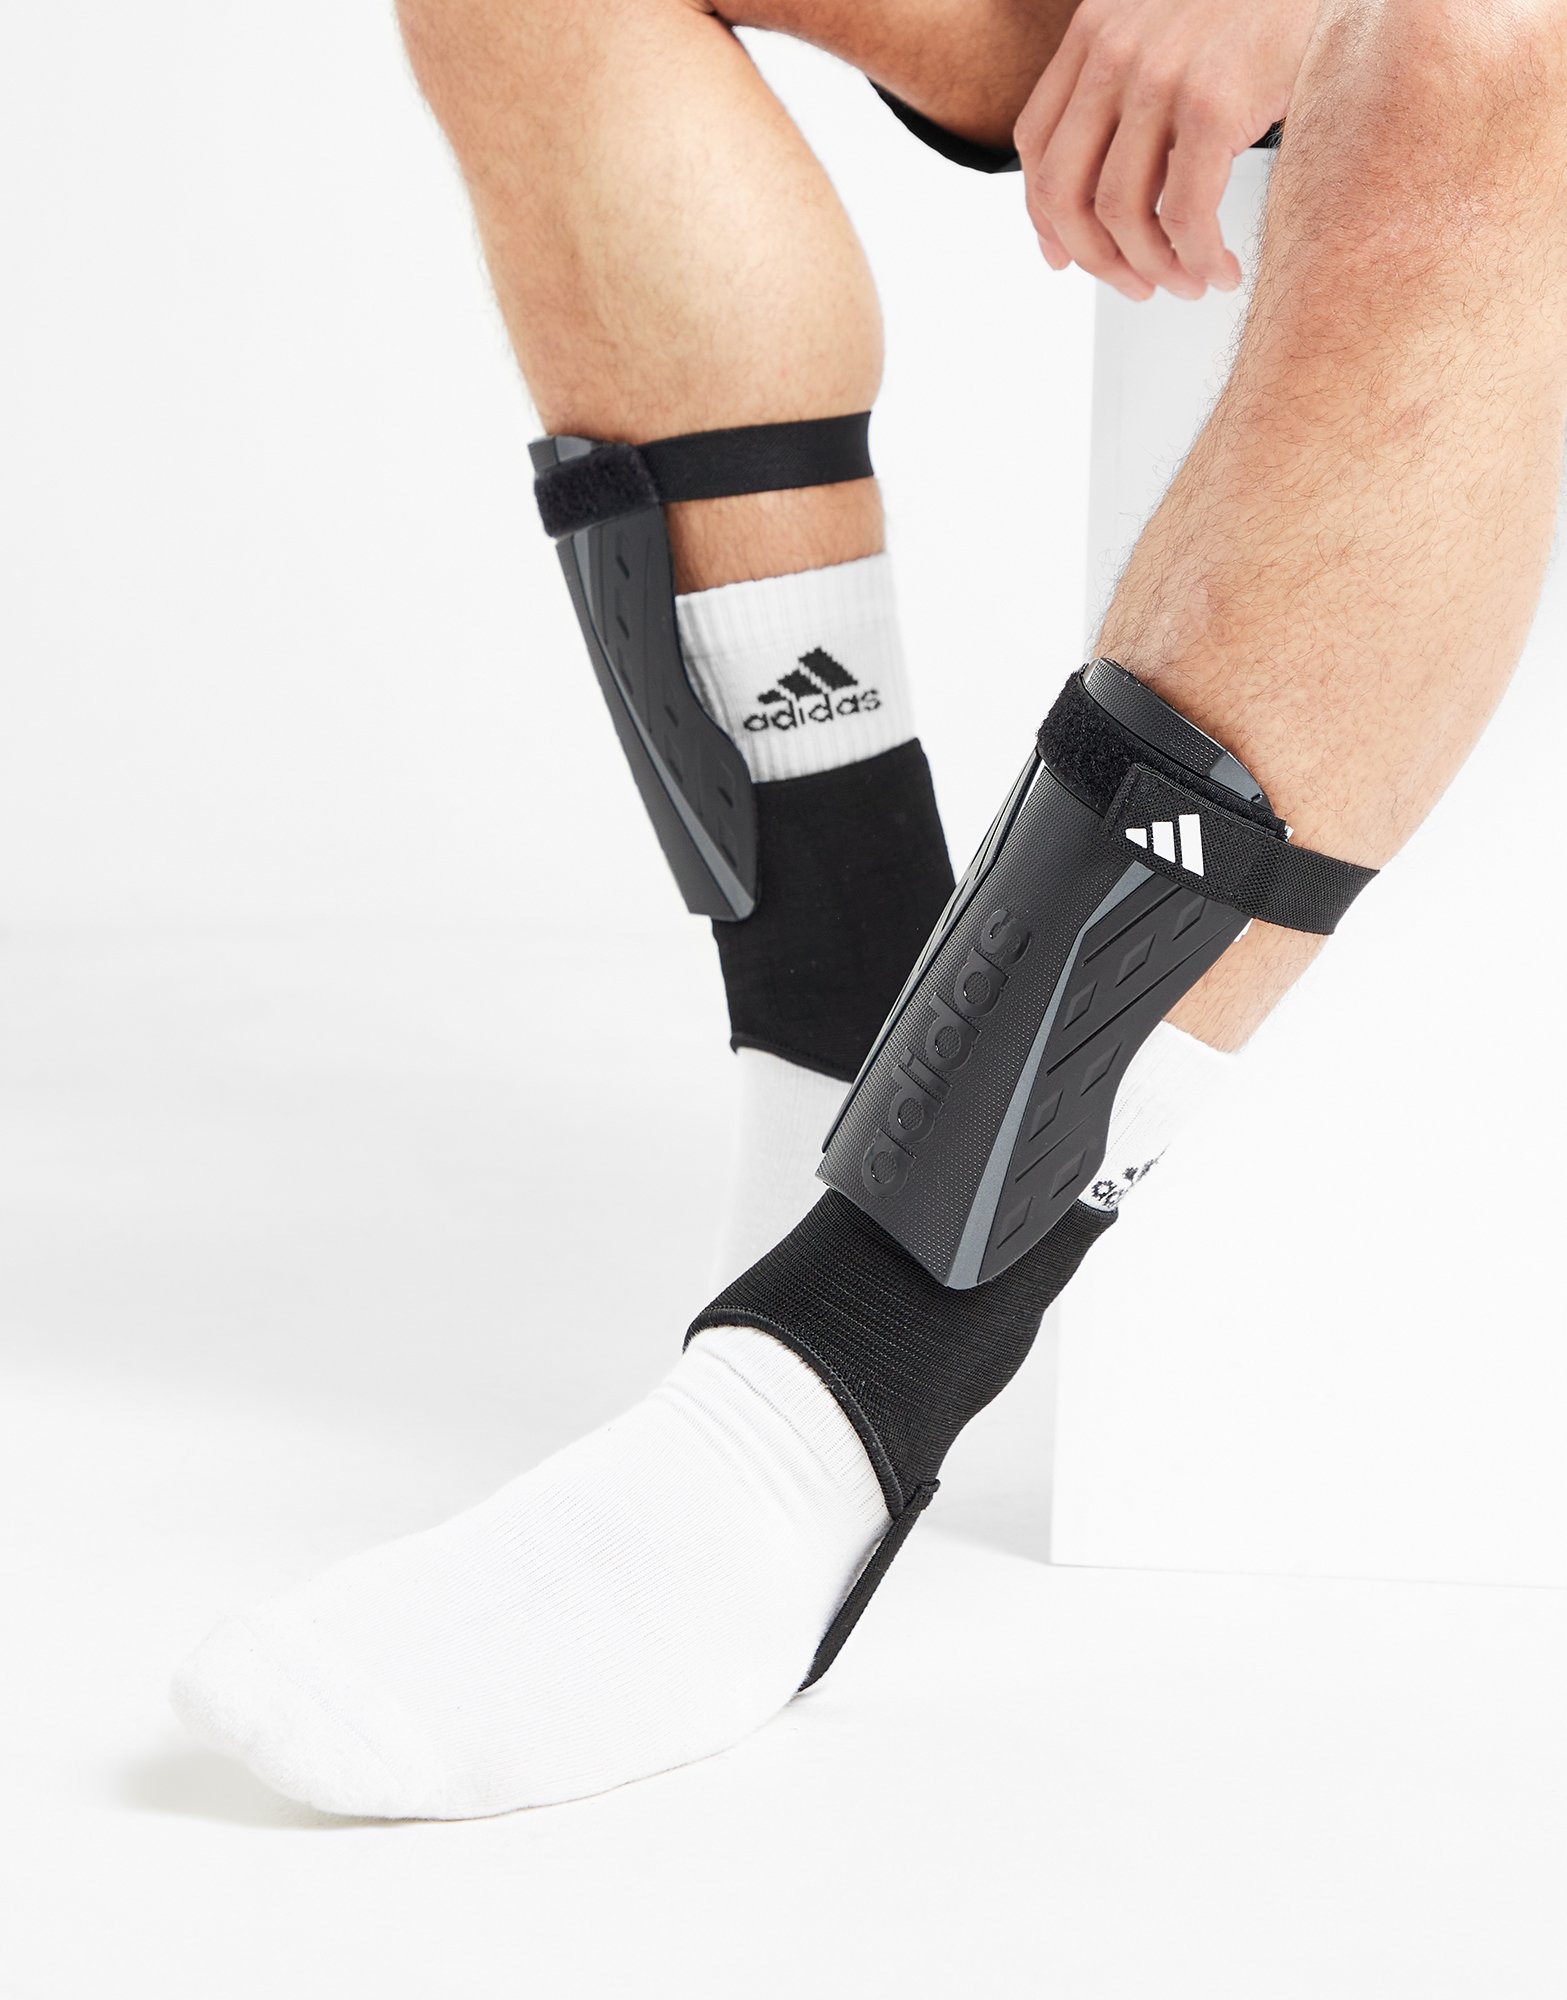 Protège tibia Taille L Adidas - football